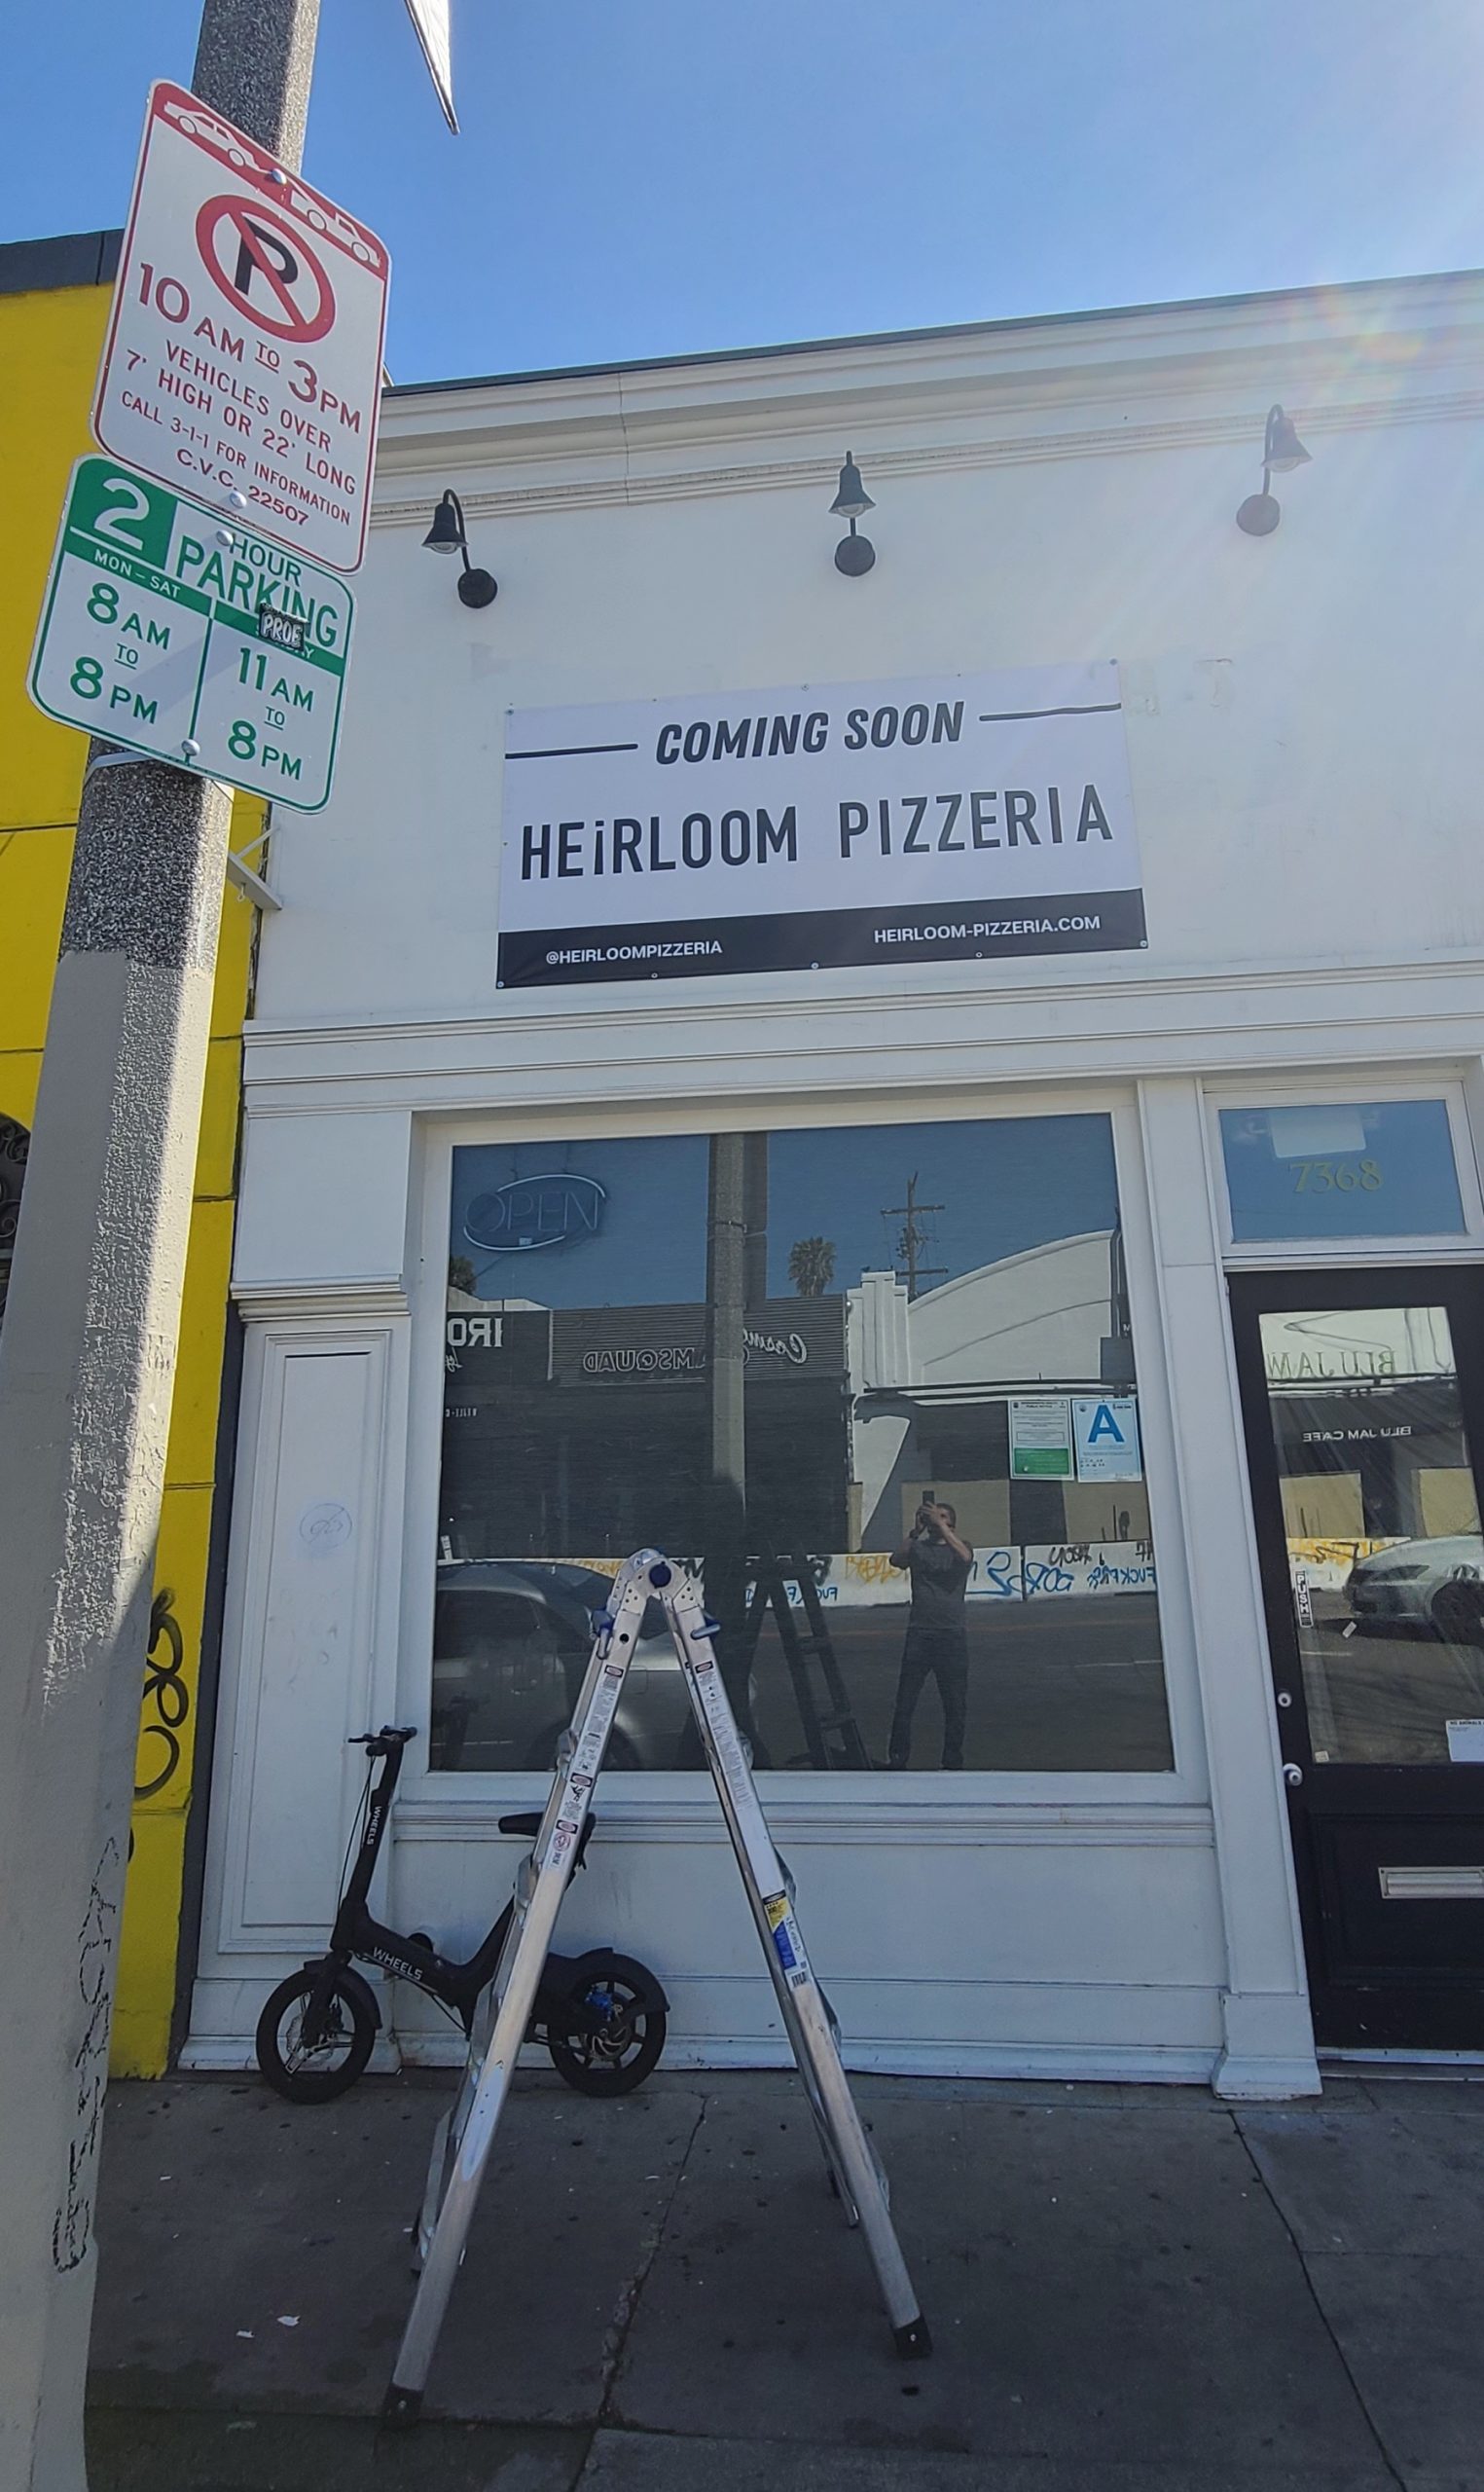 This is the temporary banner we provided Heirloom Pizza while we make their permeant sign.